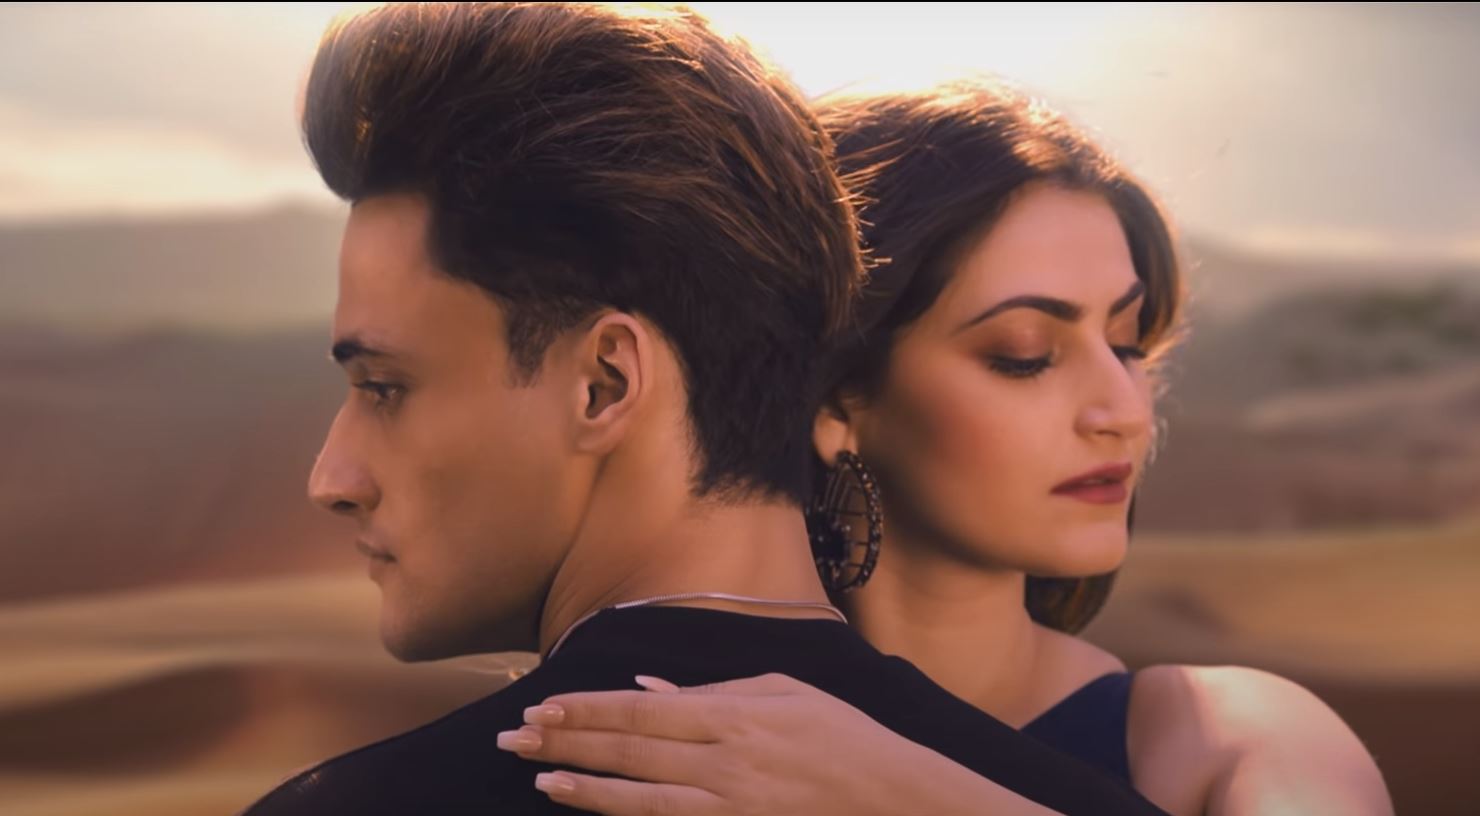 Asim Riaz And Shivaleeka Oberoi's Saiyyonee Is A Song For The Broken Souls, But The Chemistry Disappoints